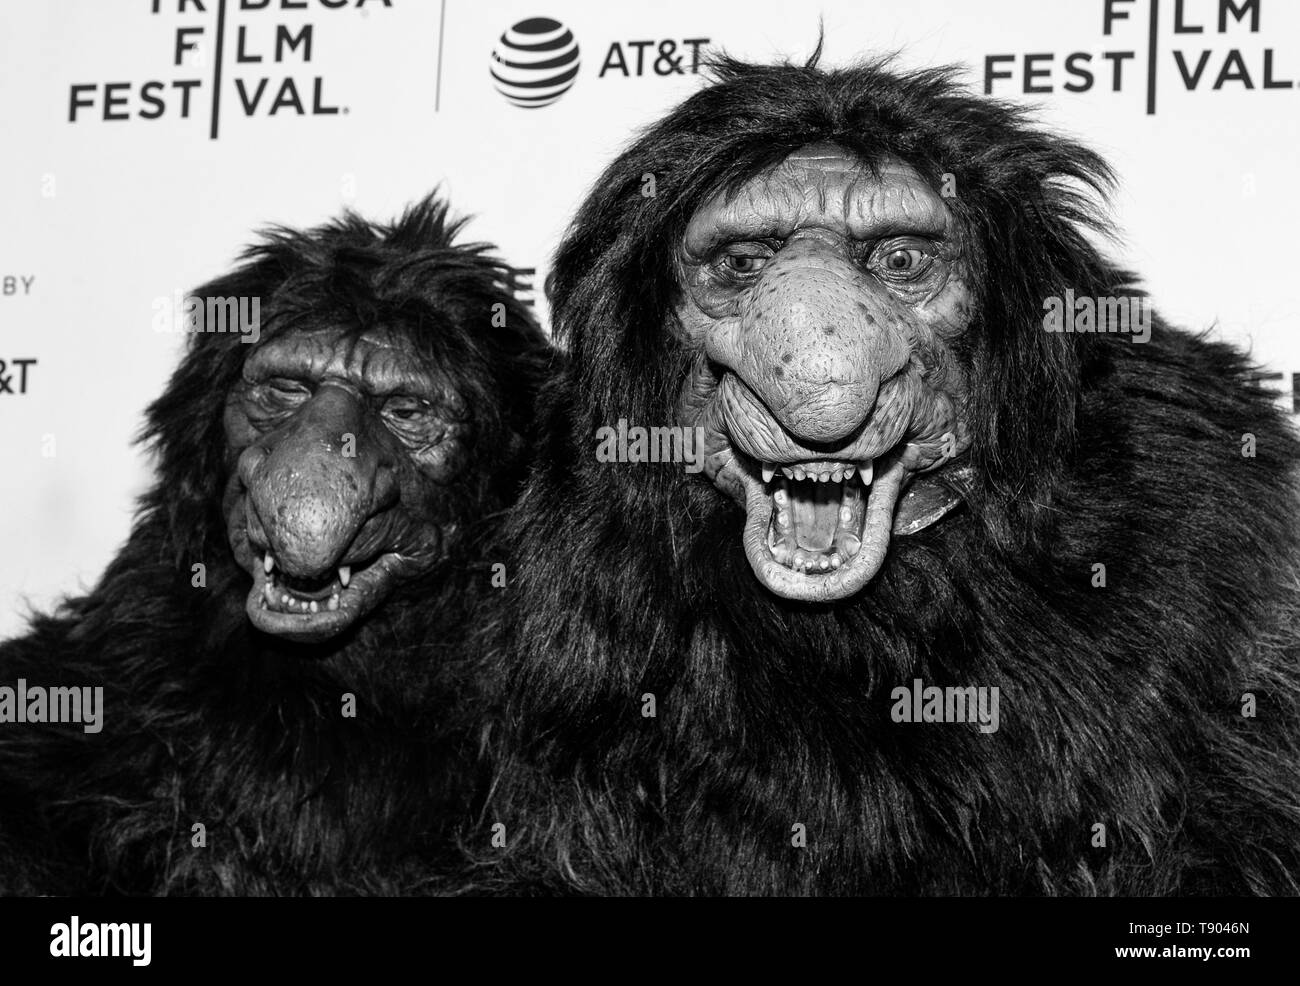 New York, NY - April 27, 2019: Grumblers - Boomer and Morse attend the premiere of the 'The Place of No Words' during the 2019 Tribeca Film Festival a Stock Photo